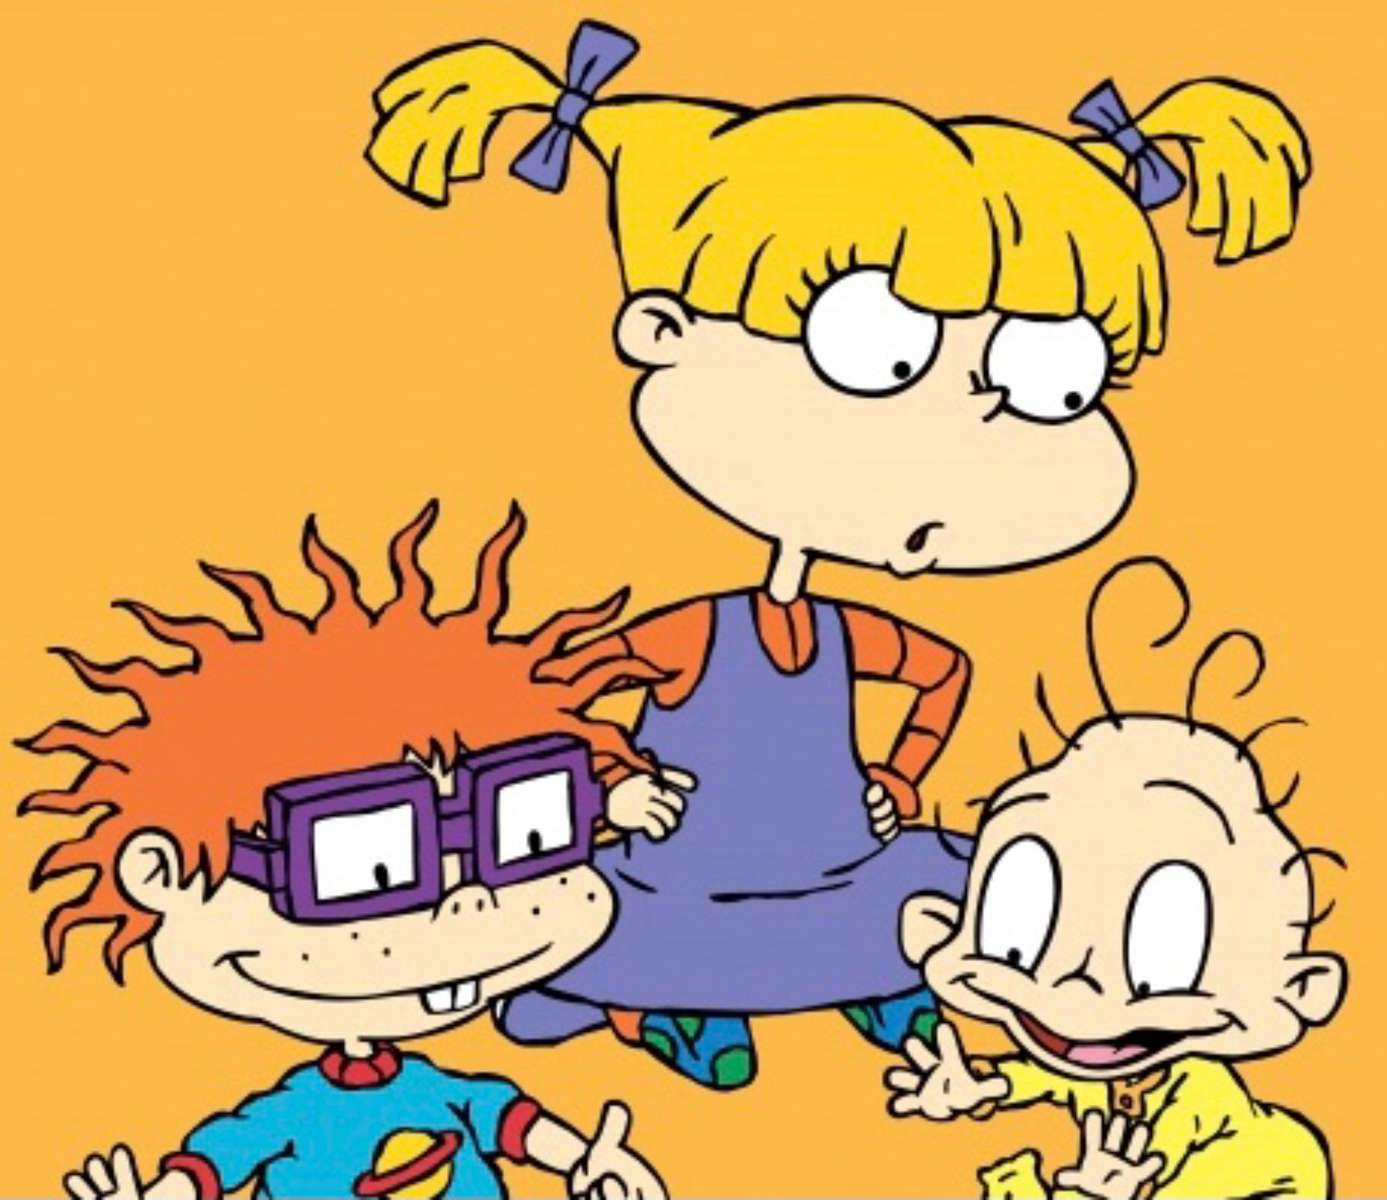 Chuckie, Angelica a Dil online puzzle